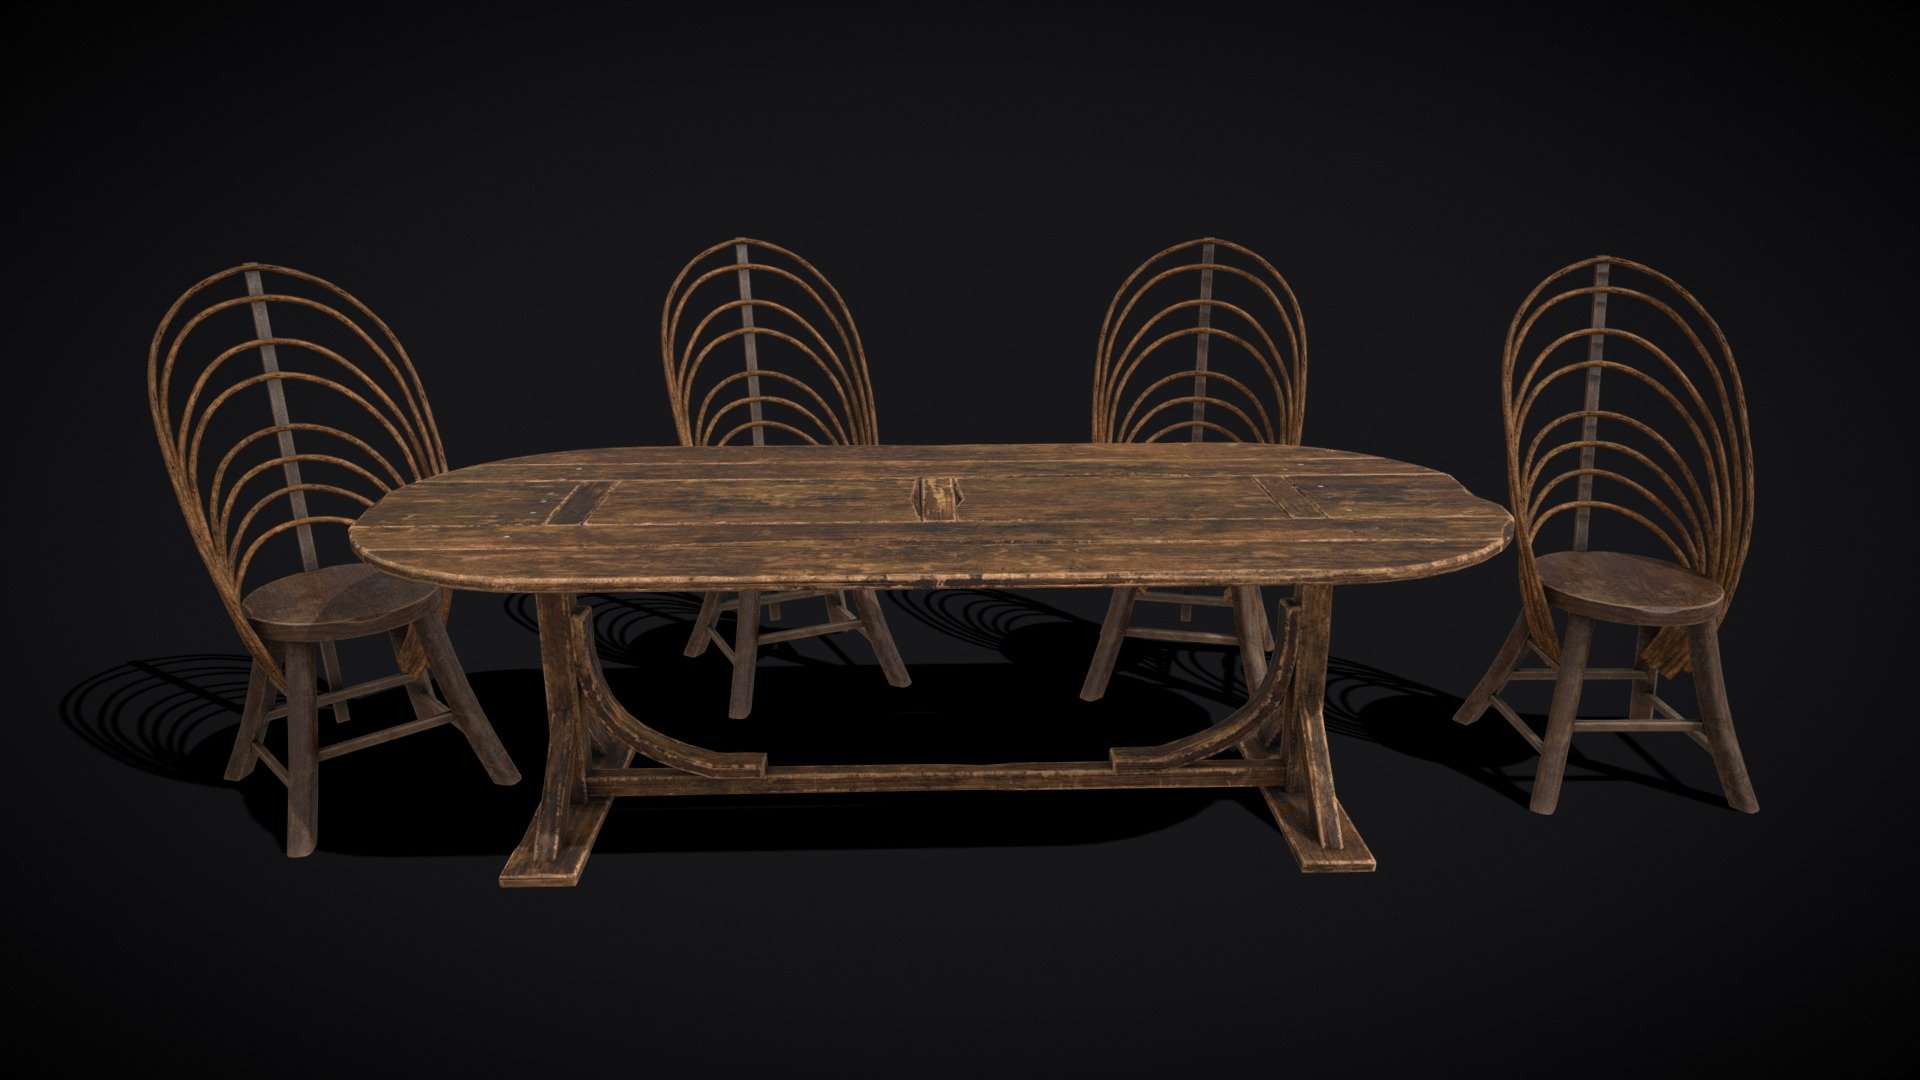 Rustic Table and Bent Stick Chairs 3D Model Collection
VR / AR / Low-poly2/2
PBR2/2 - Rustic Table and Bent Stick Chairs - Buy Royalty Free 3D model by GetDeadEntertainment 3d model